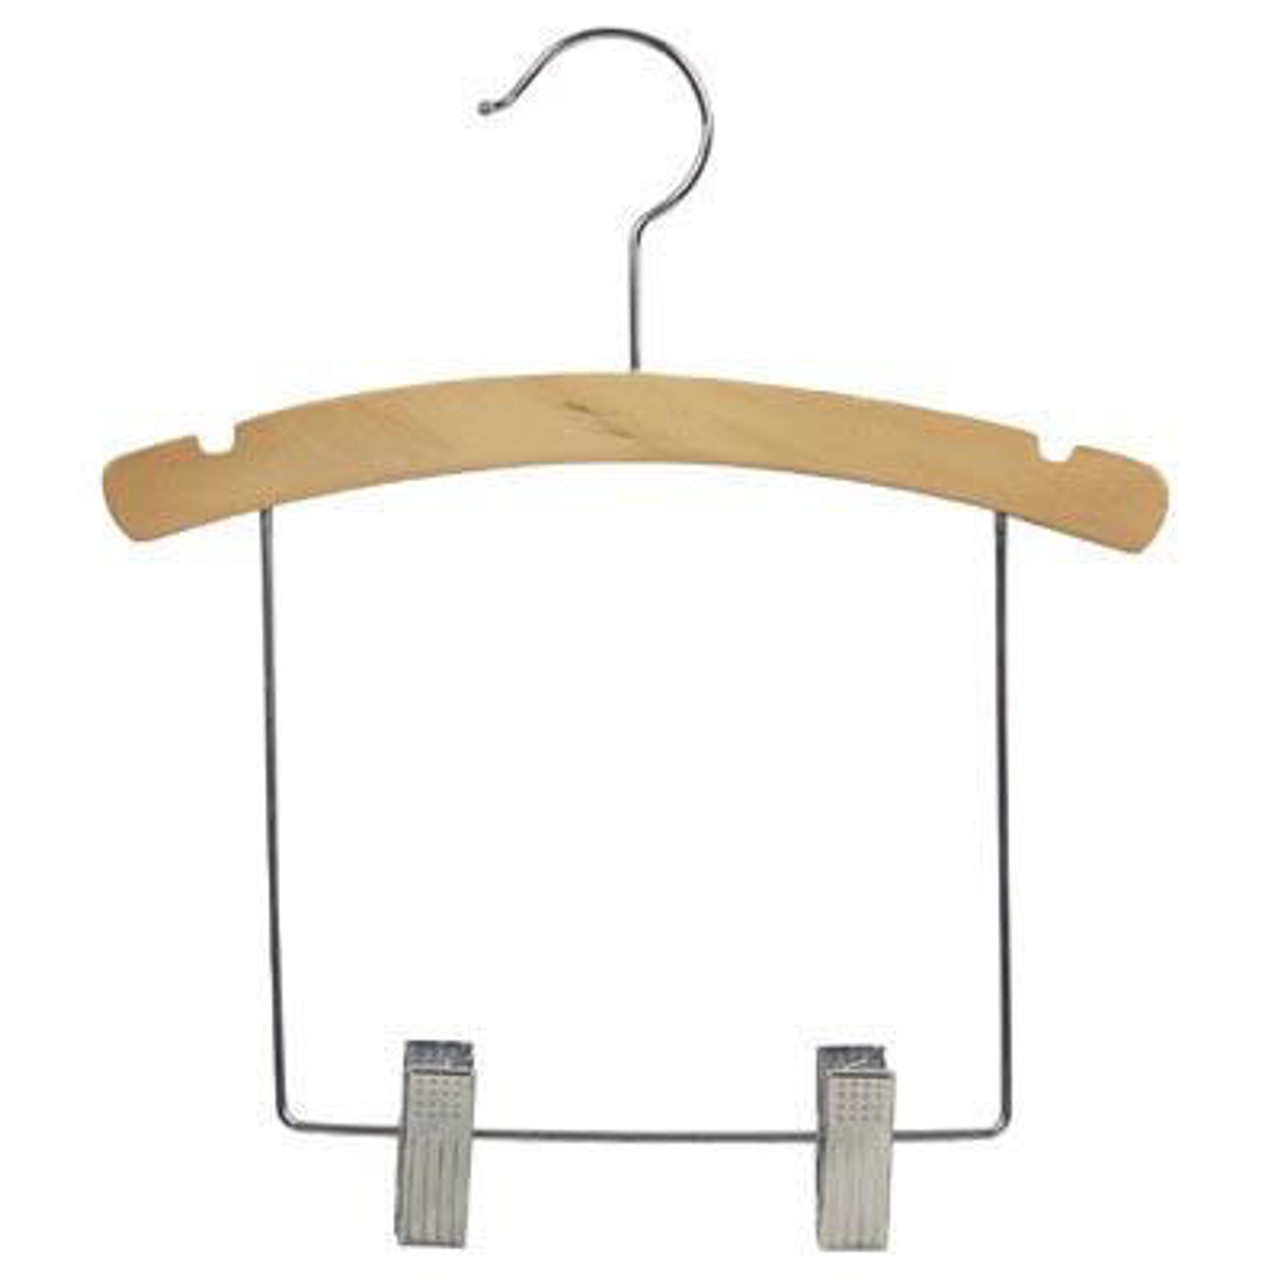 https://cdn11.bigcommerce.com/s-bxamz43bkh/images/stencil/1280x1280/products/9827/10796/infant-baby-wooden-outfit-hanger-box-of-100-5__97127.1637024583.jpg?c=1